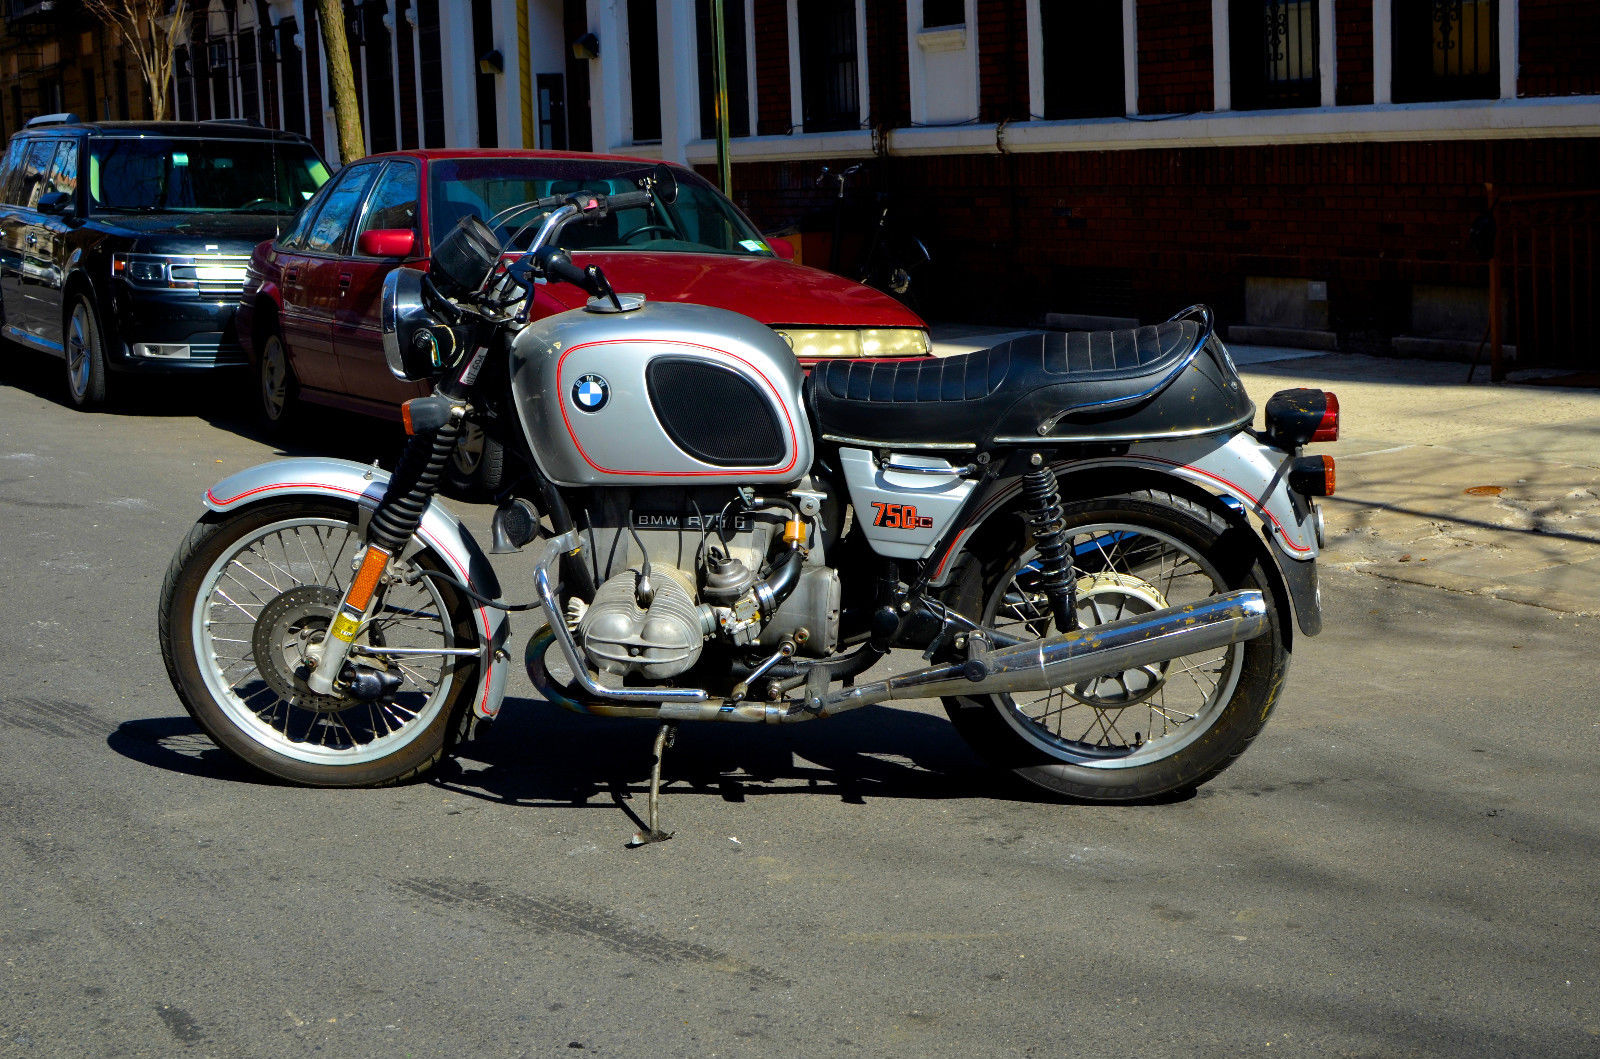 Jack-Of-All-Trades: 1975 BMW R75/6 for Sale – Classic Sport Bikes For Sale